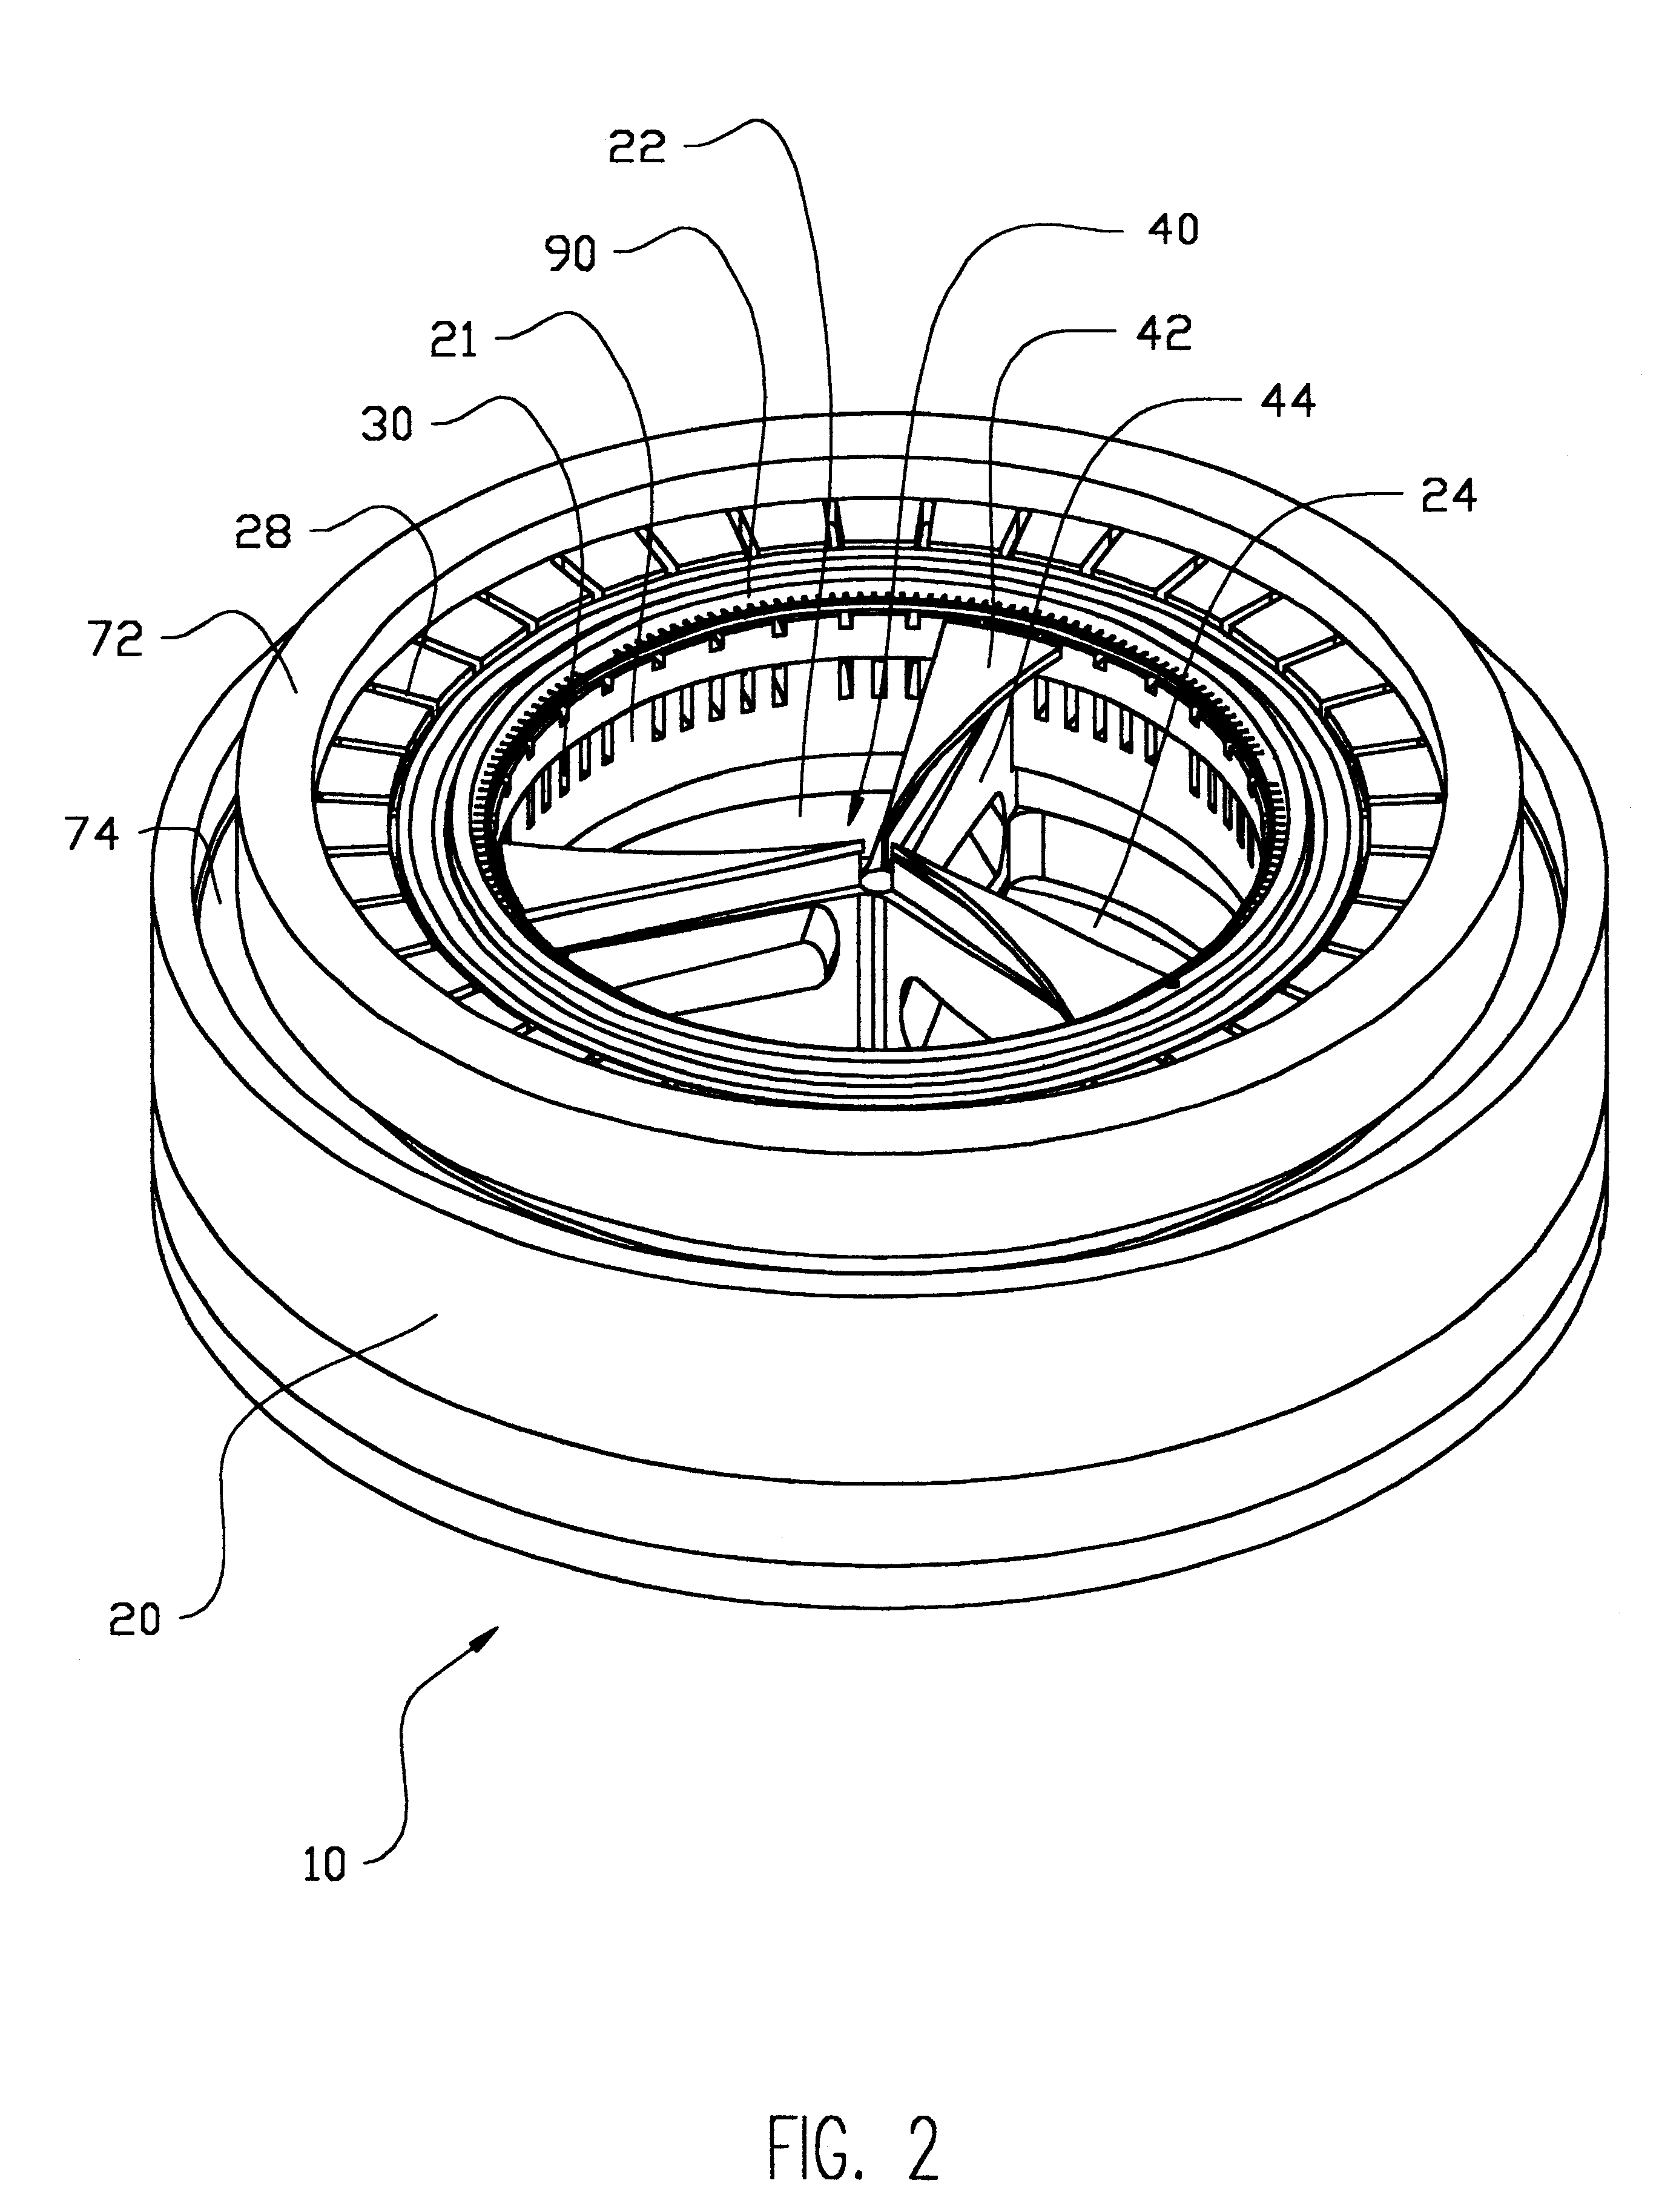 Method of and apparatus for controlling fluid flow and electric fields involved in the electroplating of substantially flat workpieces and the like and more generally controlling fluid flow in the processing of other work piece surfaces as well